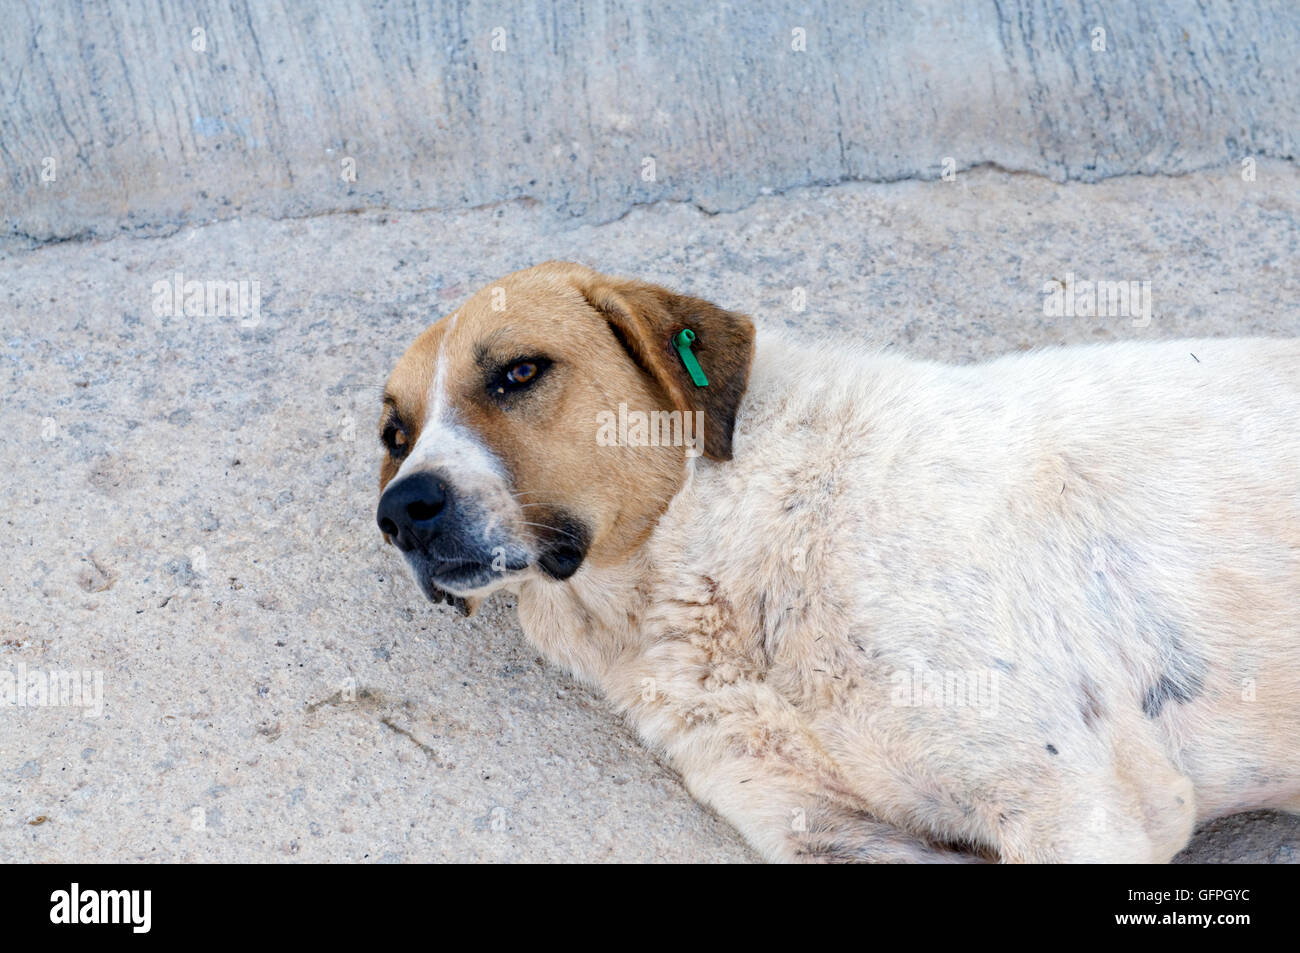 Street dog with KAPSA clip in its ear to show that it has been neutered and immunised, Kalkan, Turkey. Stock Photo